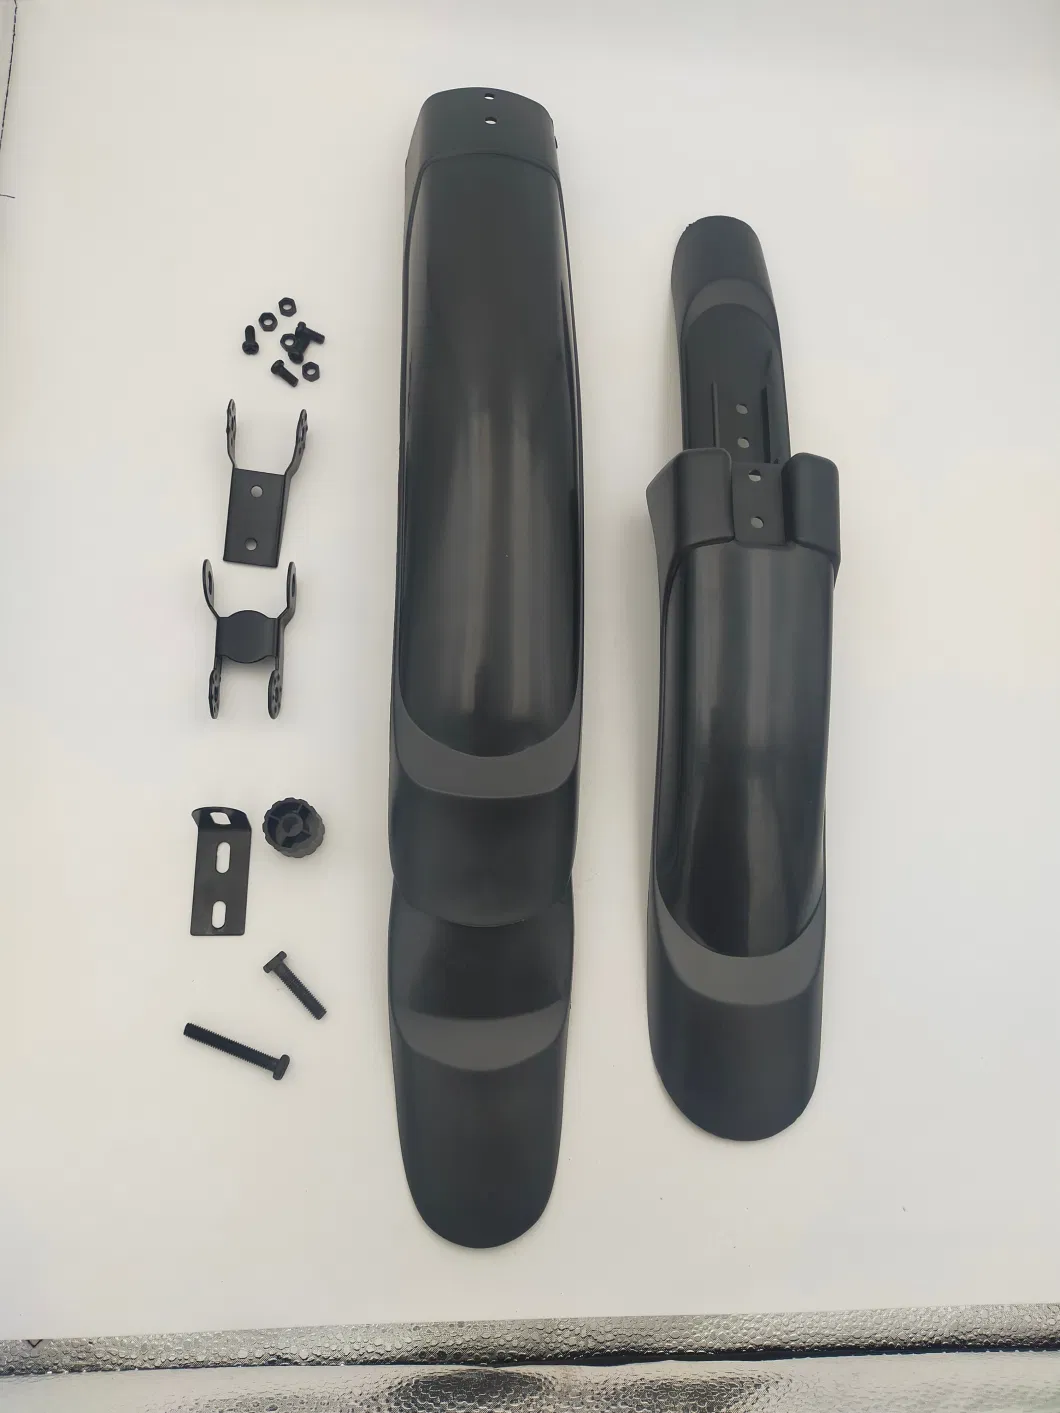 Bike Spare Parts of Bicycle Mudguard for MTB